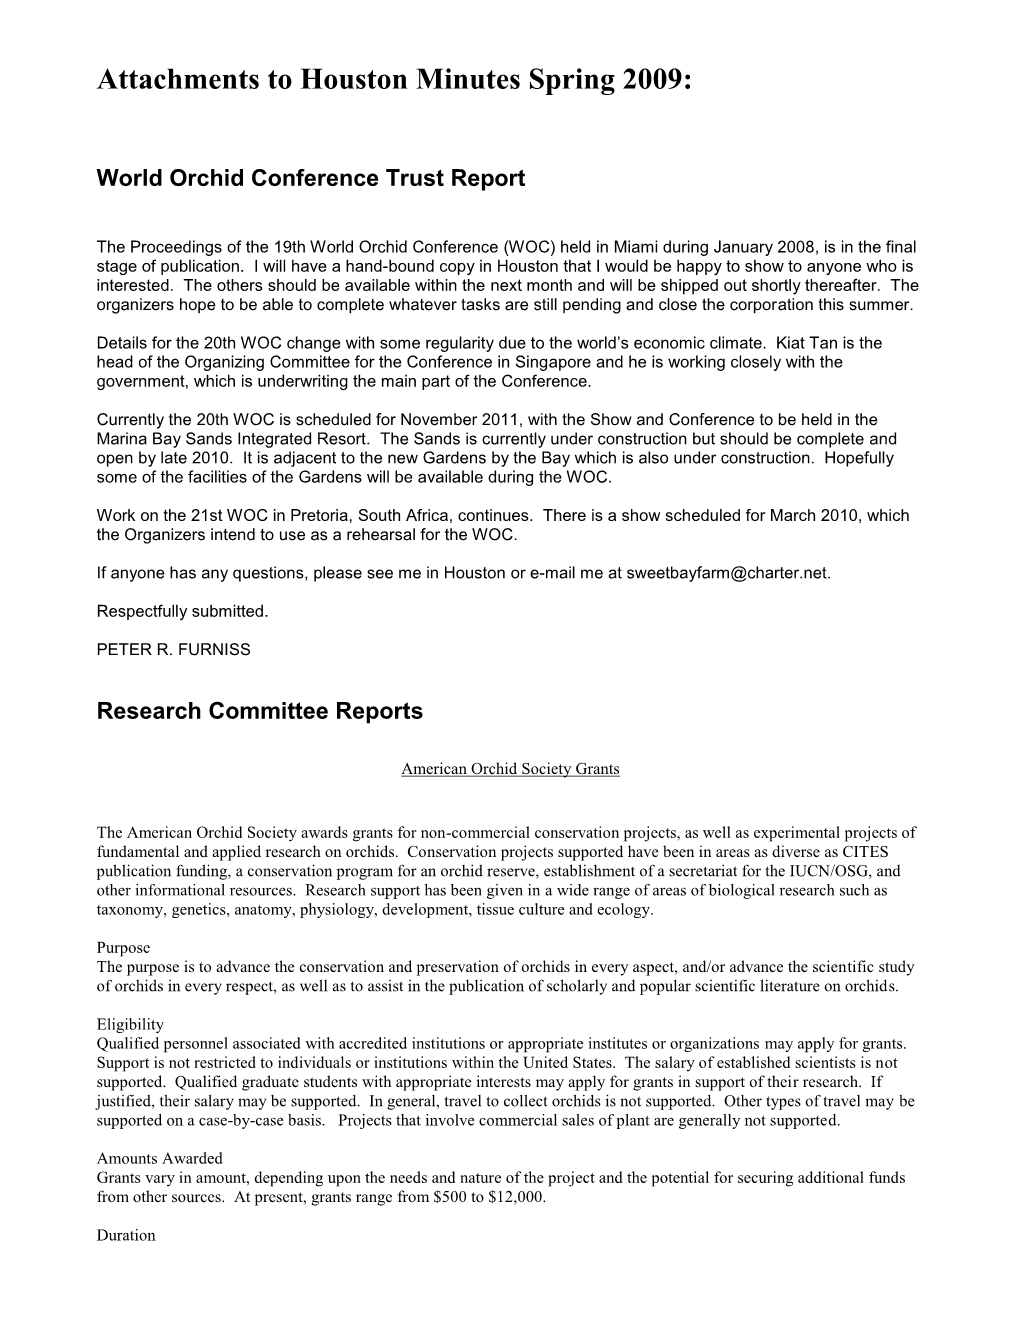 World Orchid Conference Trust Report